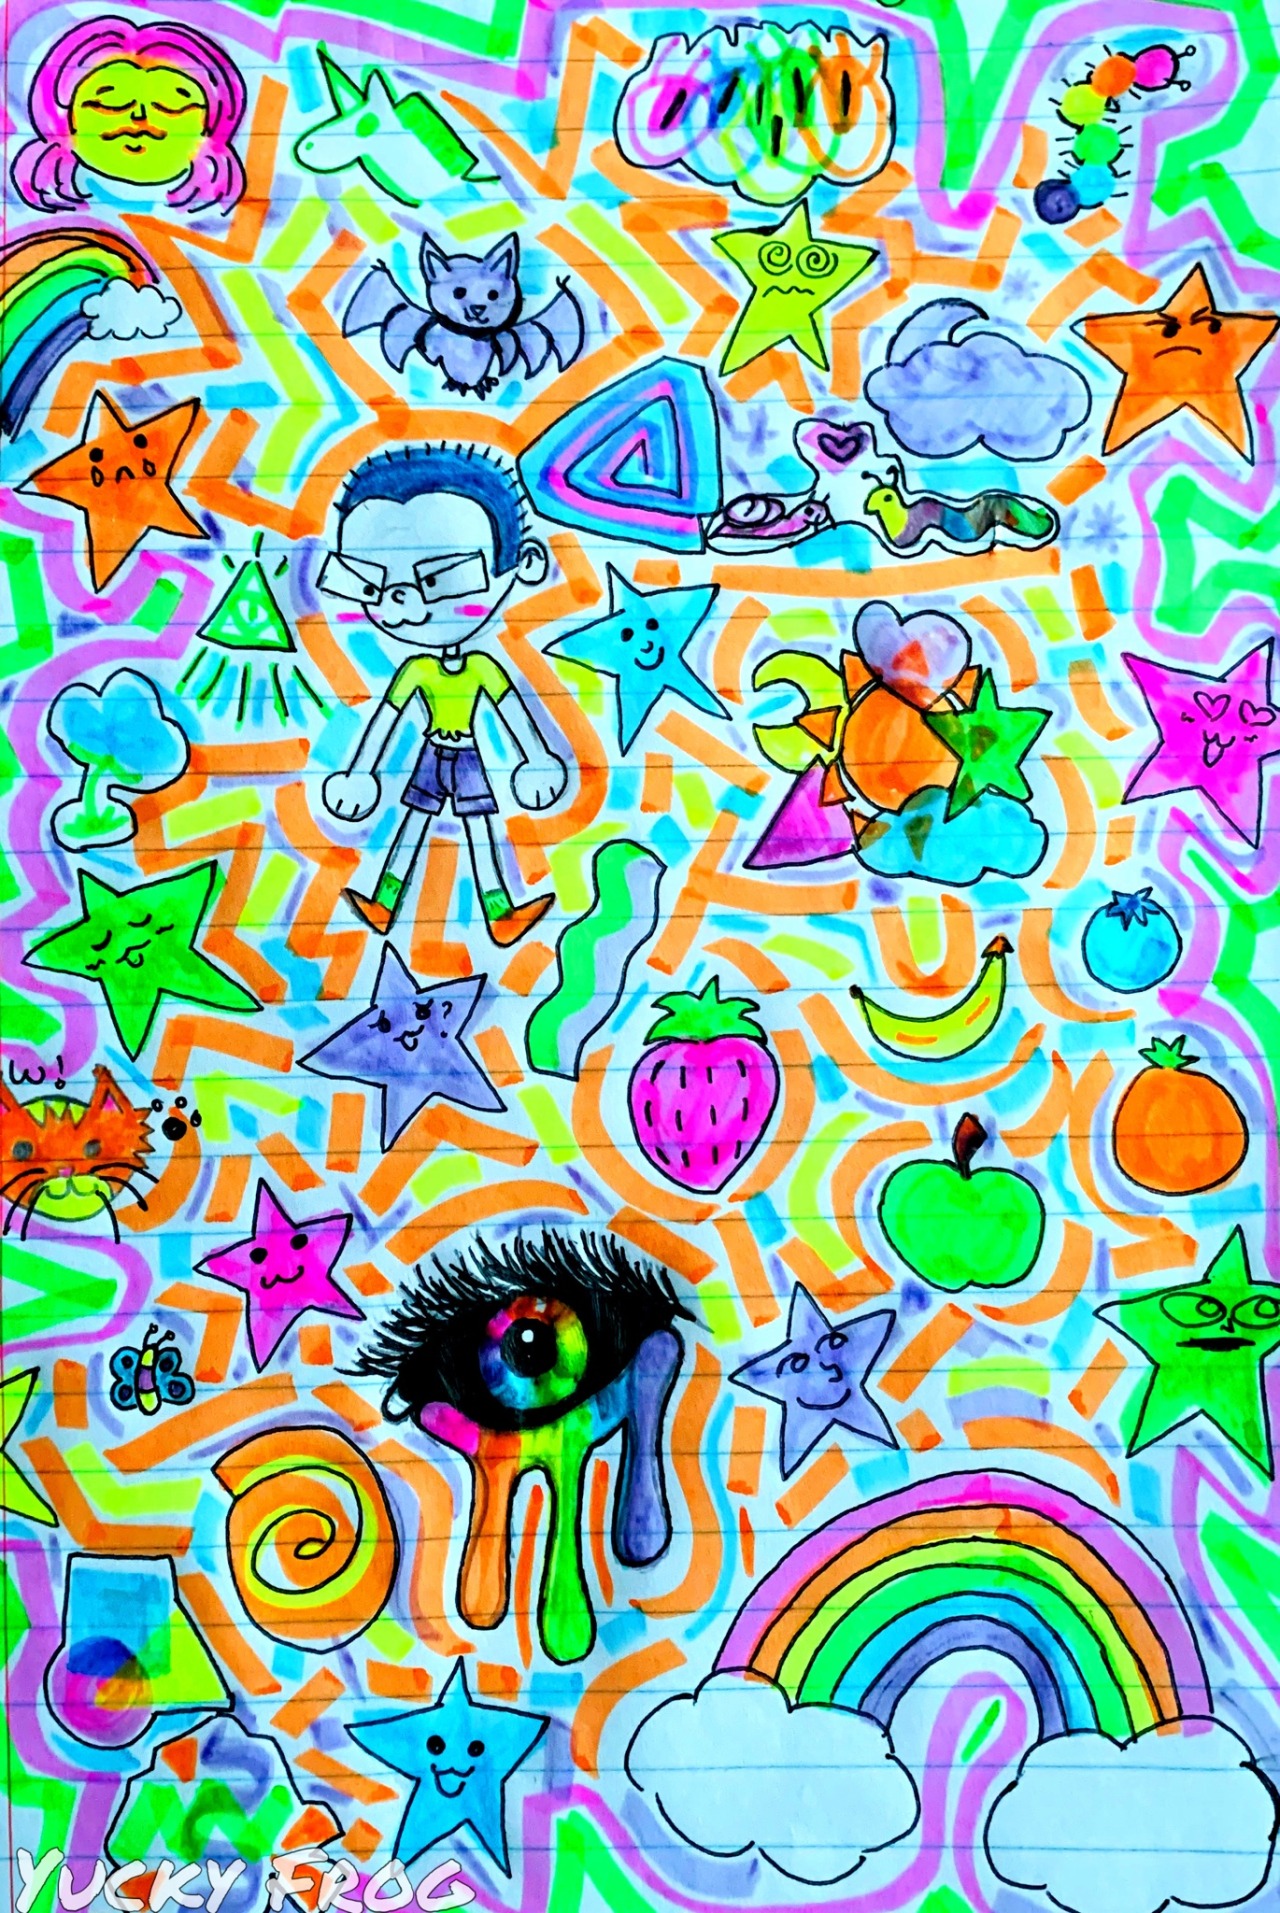 the yuckiest!! — Some trippy highlighter art I did in class